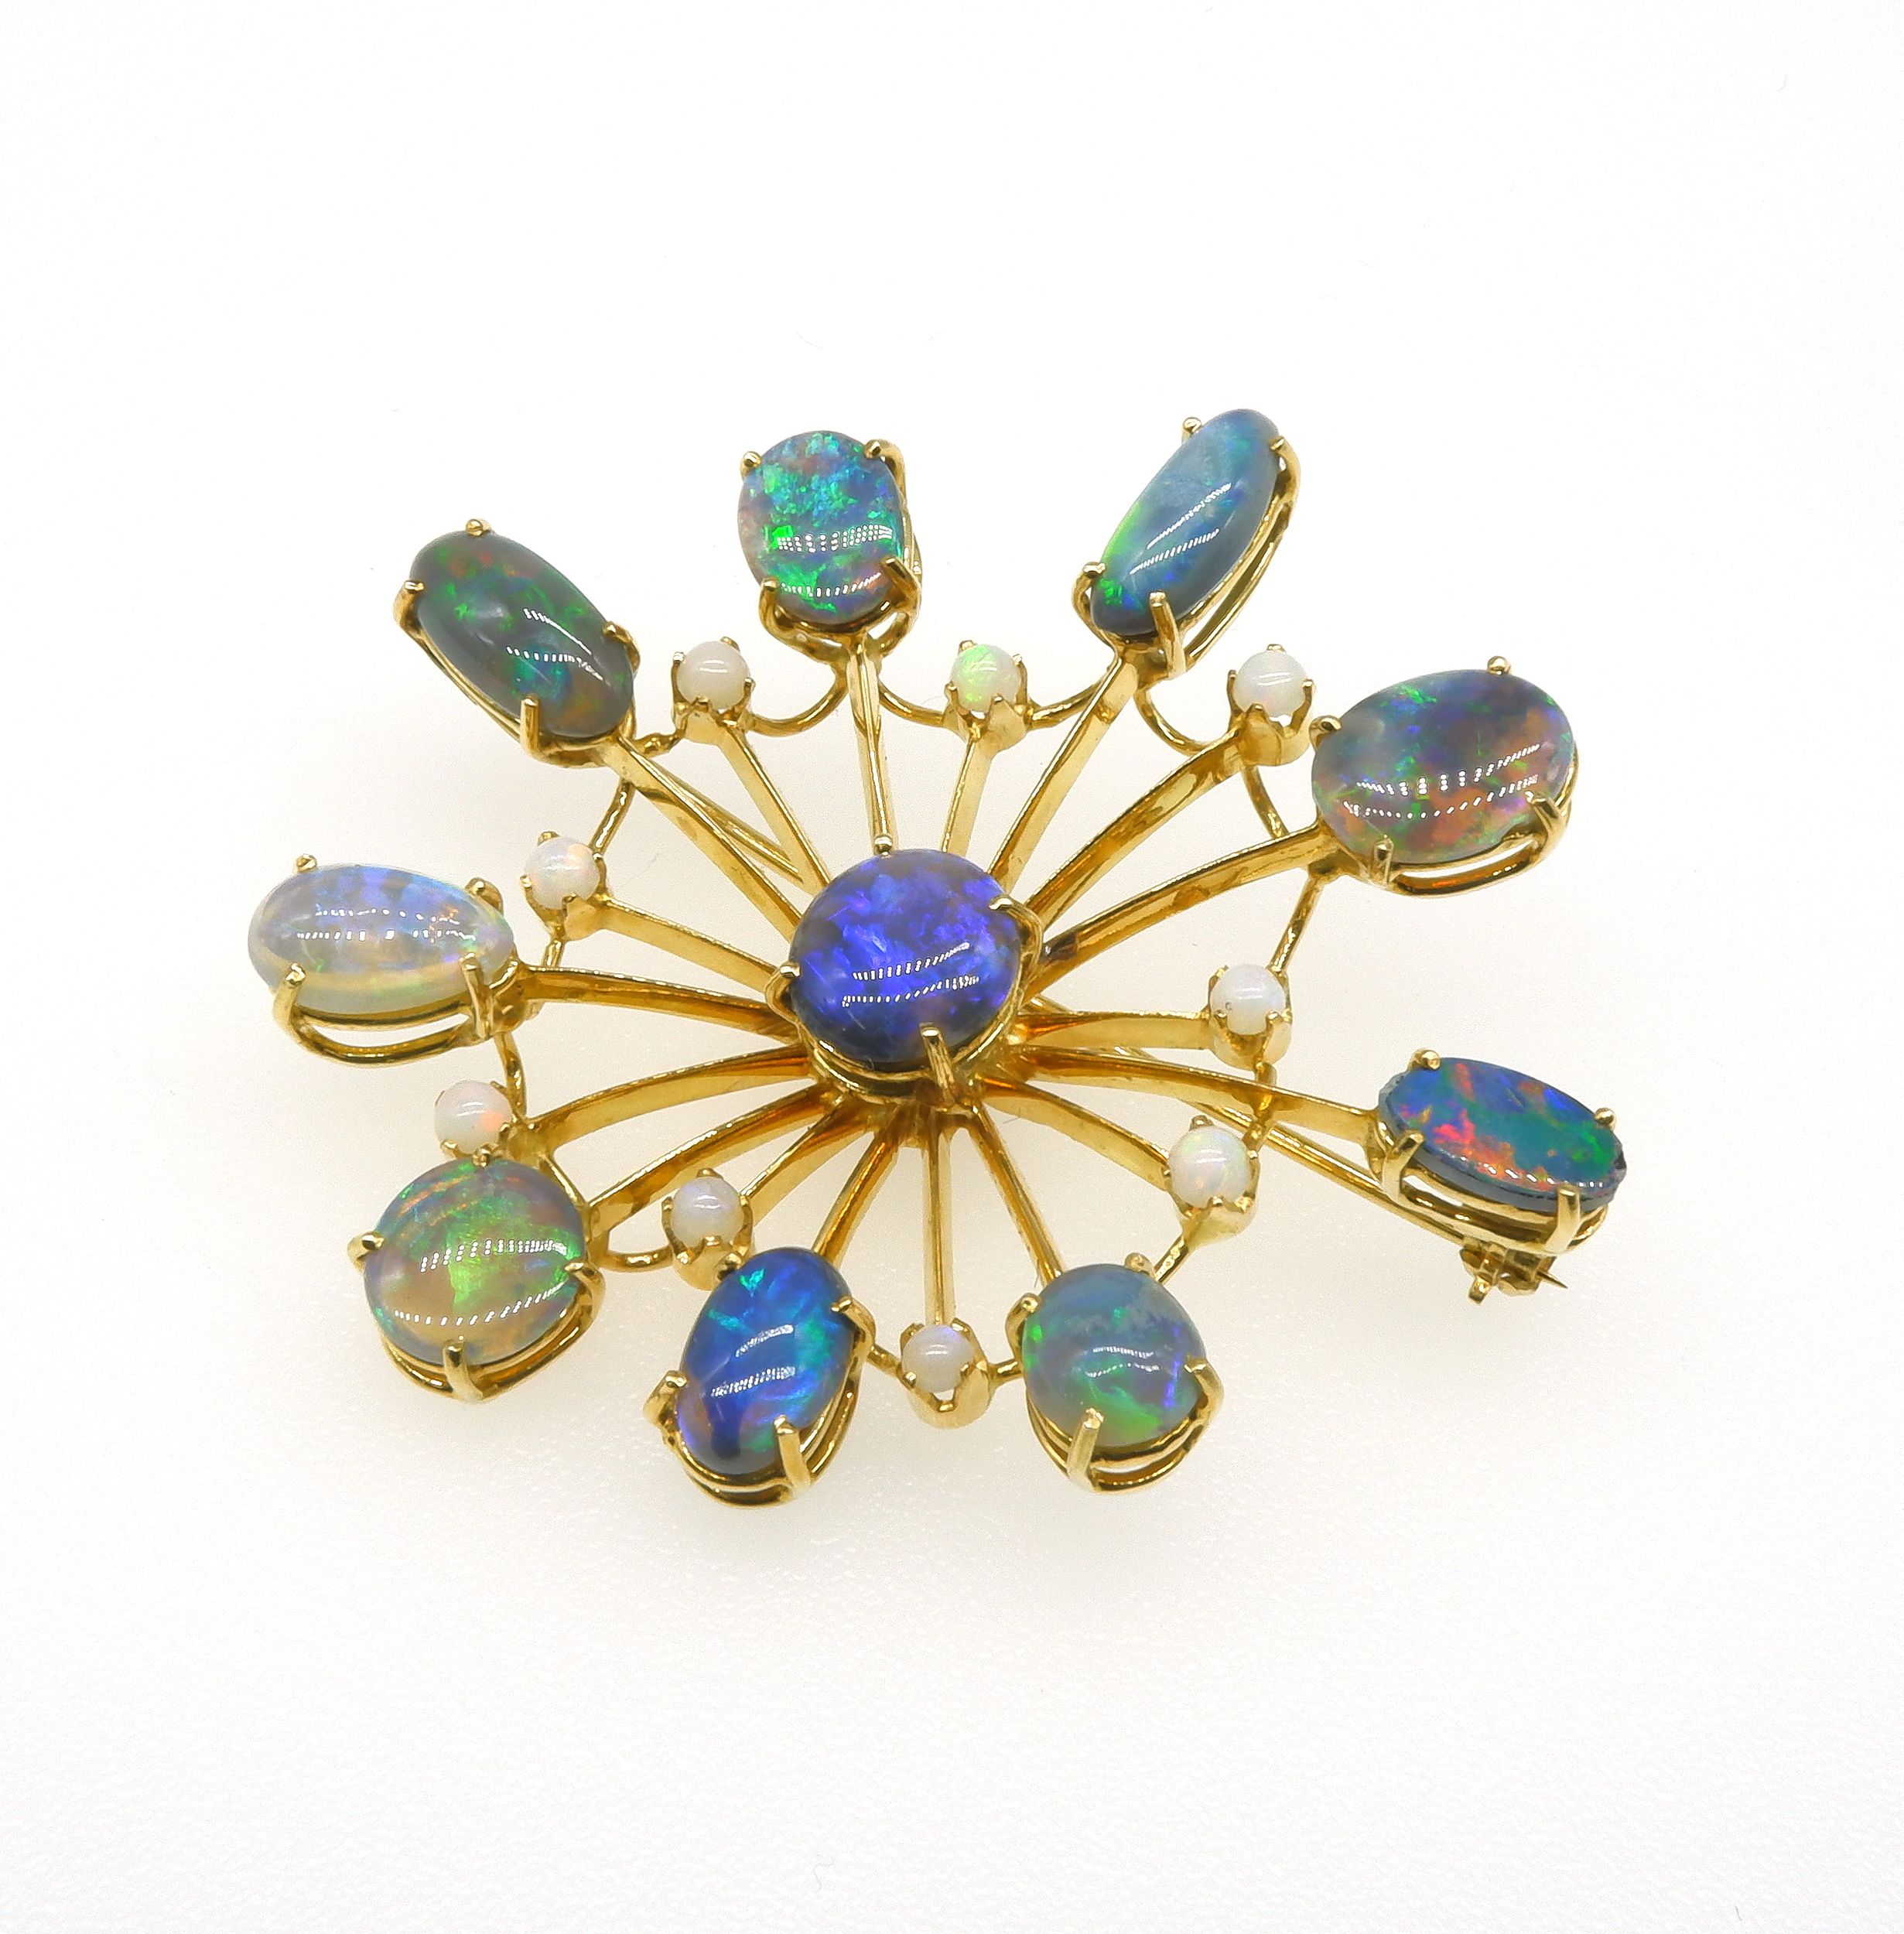 '18ct Yellow Gold Spiders Web Style Opal Brooch with Good Play of Colour'